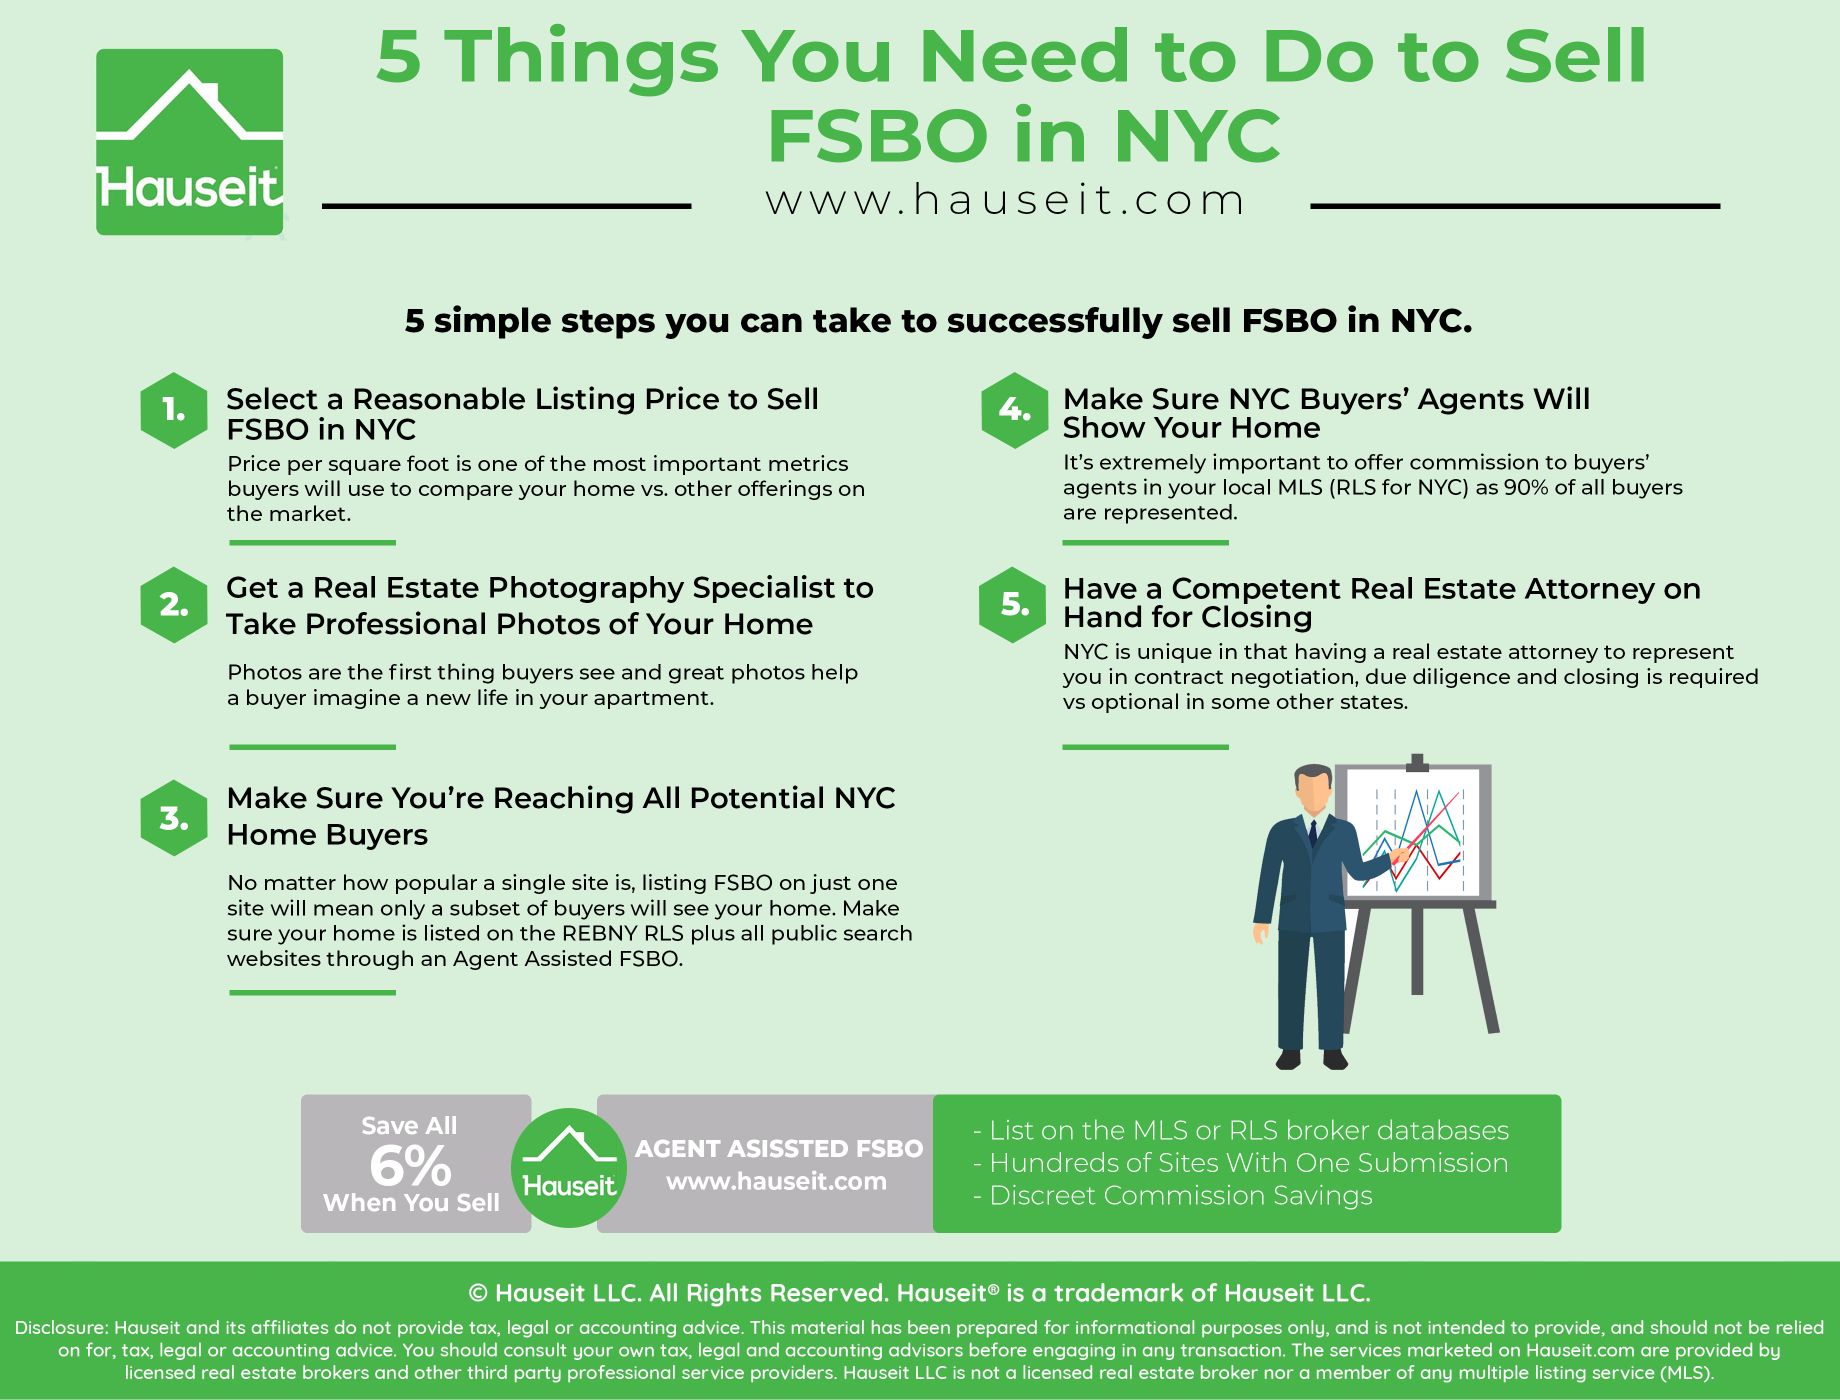 Selling FSBO in NYC is a challenge that requires preparation and research. Here are 5 things you must do to succeed if you want to sell your home without an agent in NYC.